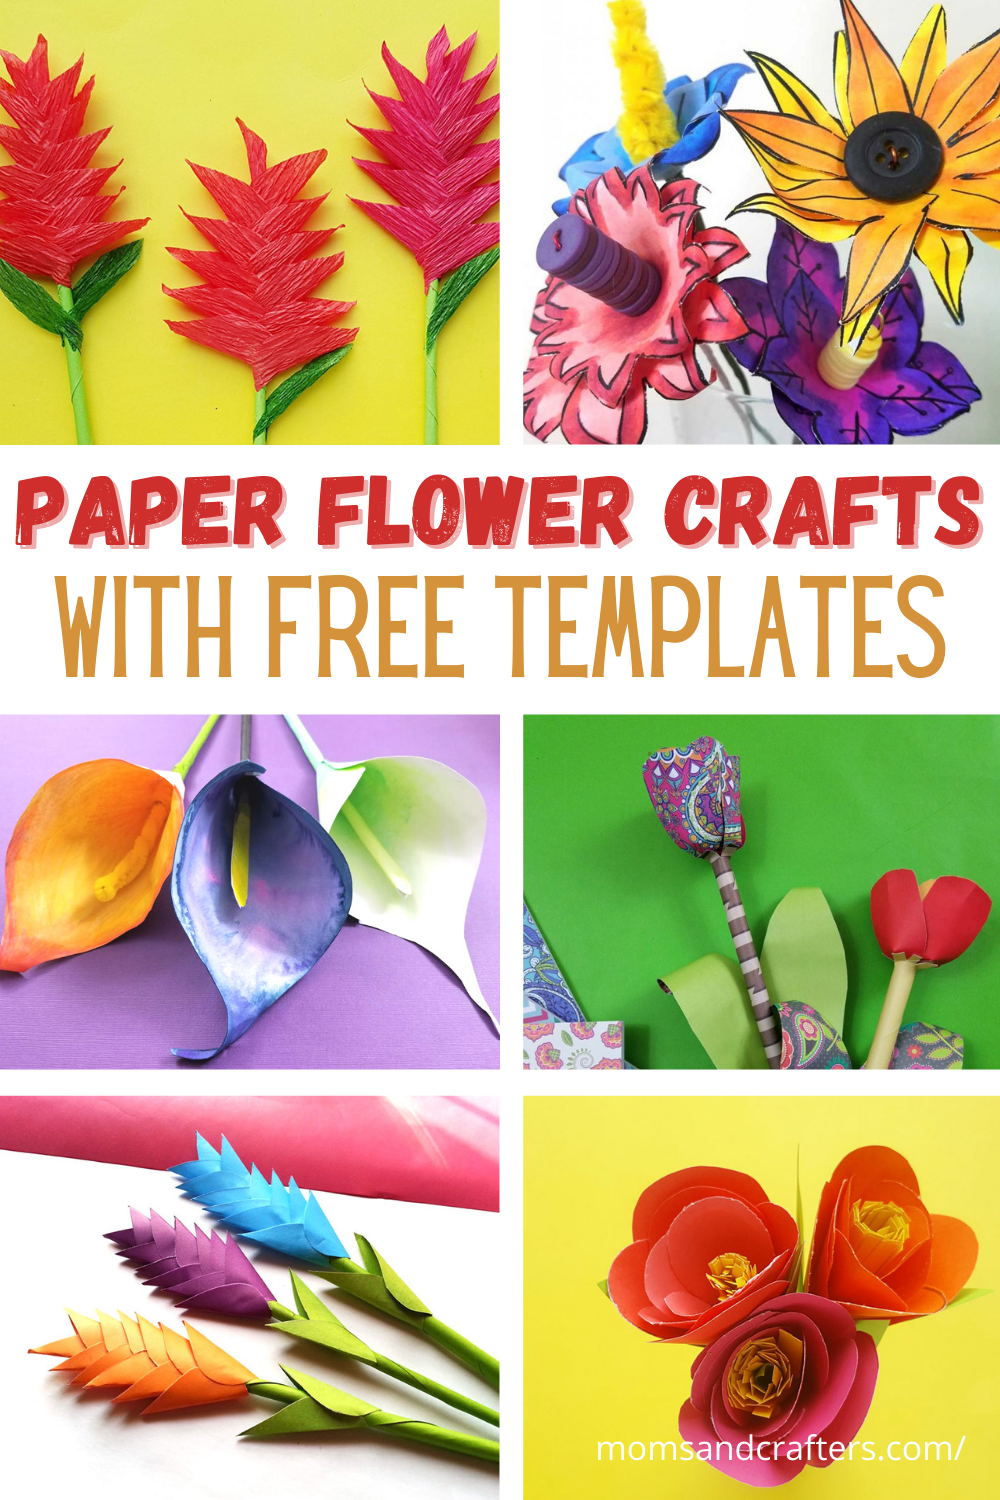 Free Flower Templates - Crepe Paper, Card Stock, and More!